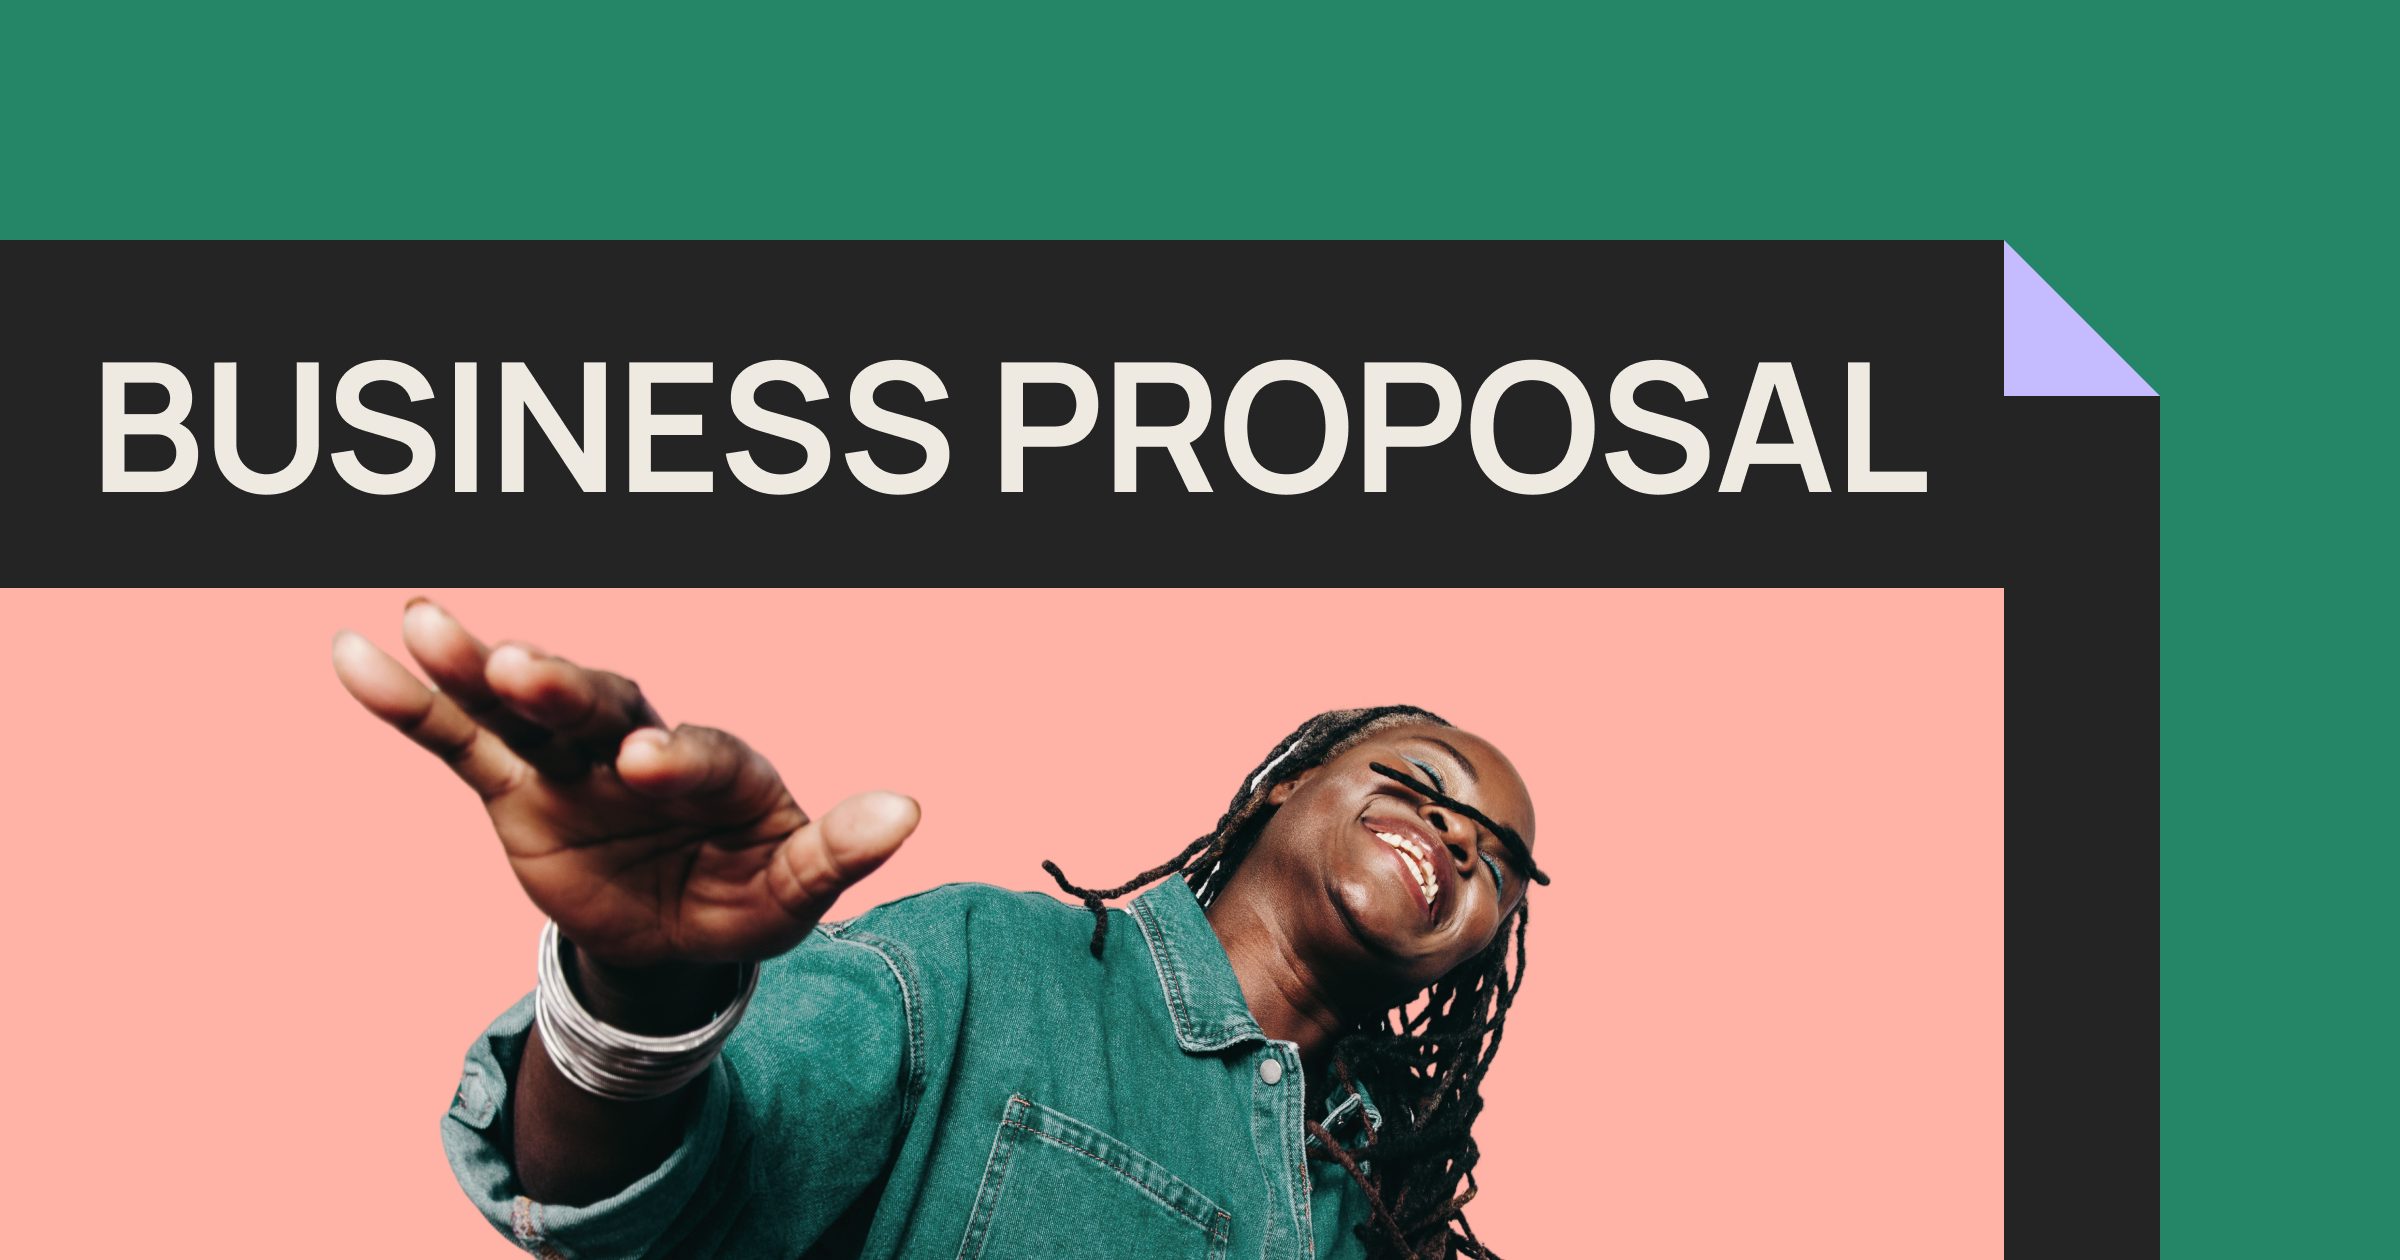 What Is a Business Proposal? A Simple Definition for Small Businesses